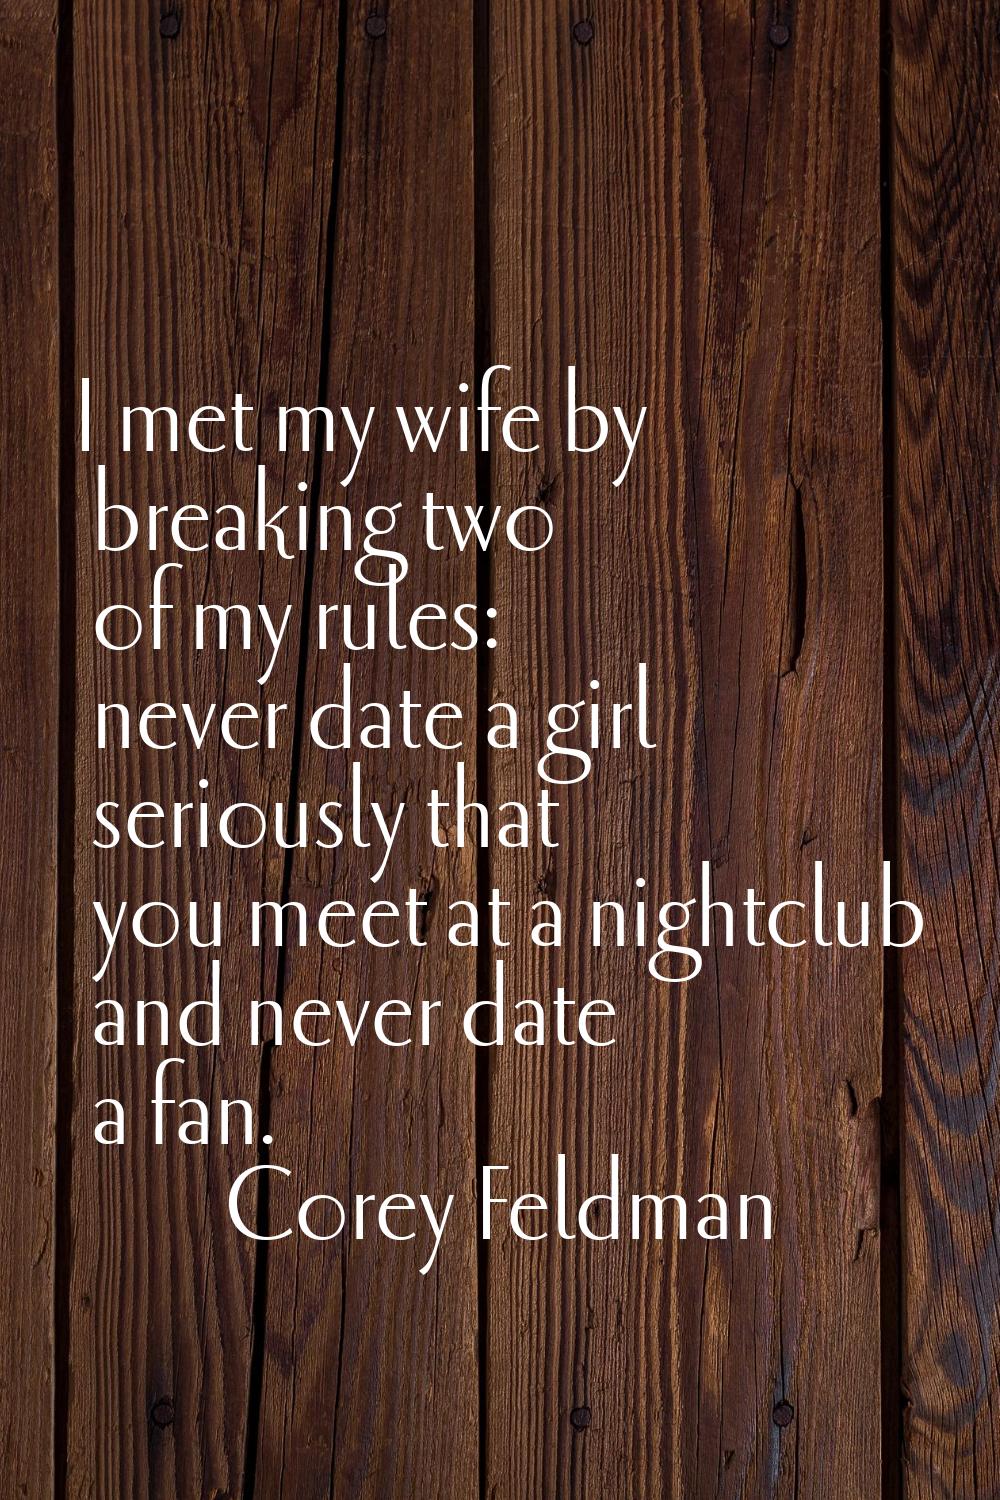 I met my wife by breaking two of my rules: never date a girl seriously that you meet at a nightclub